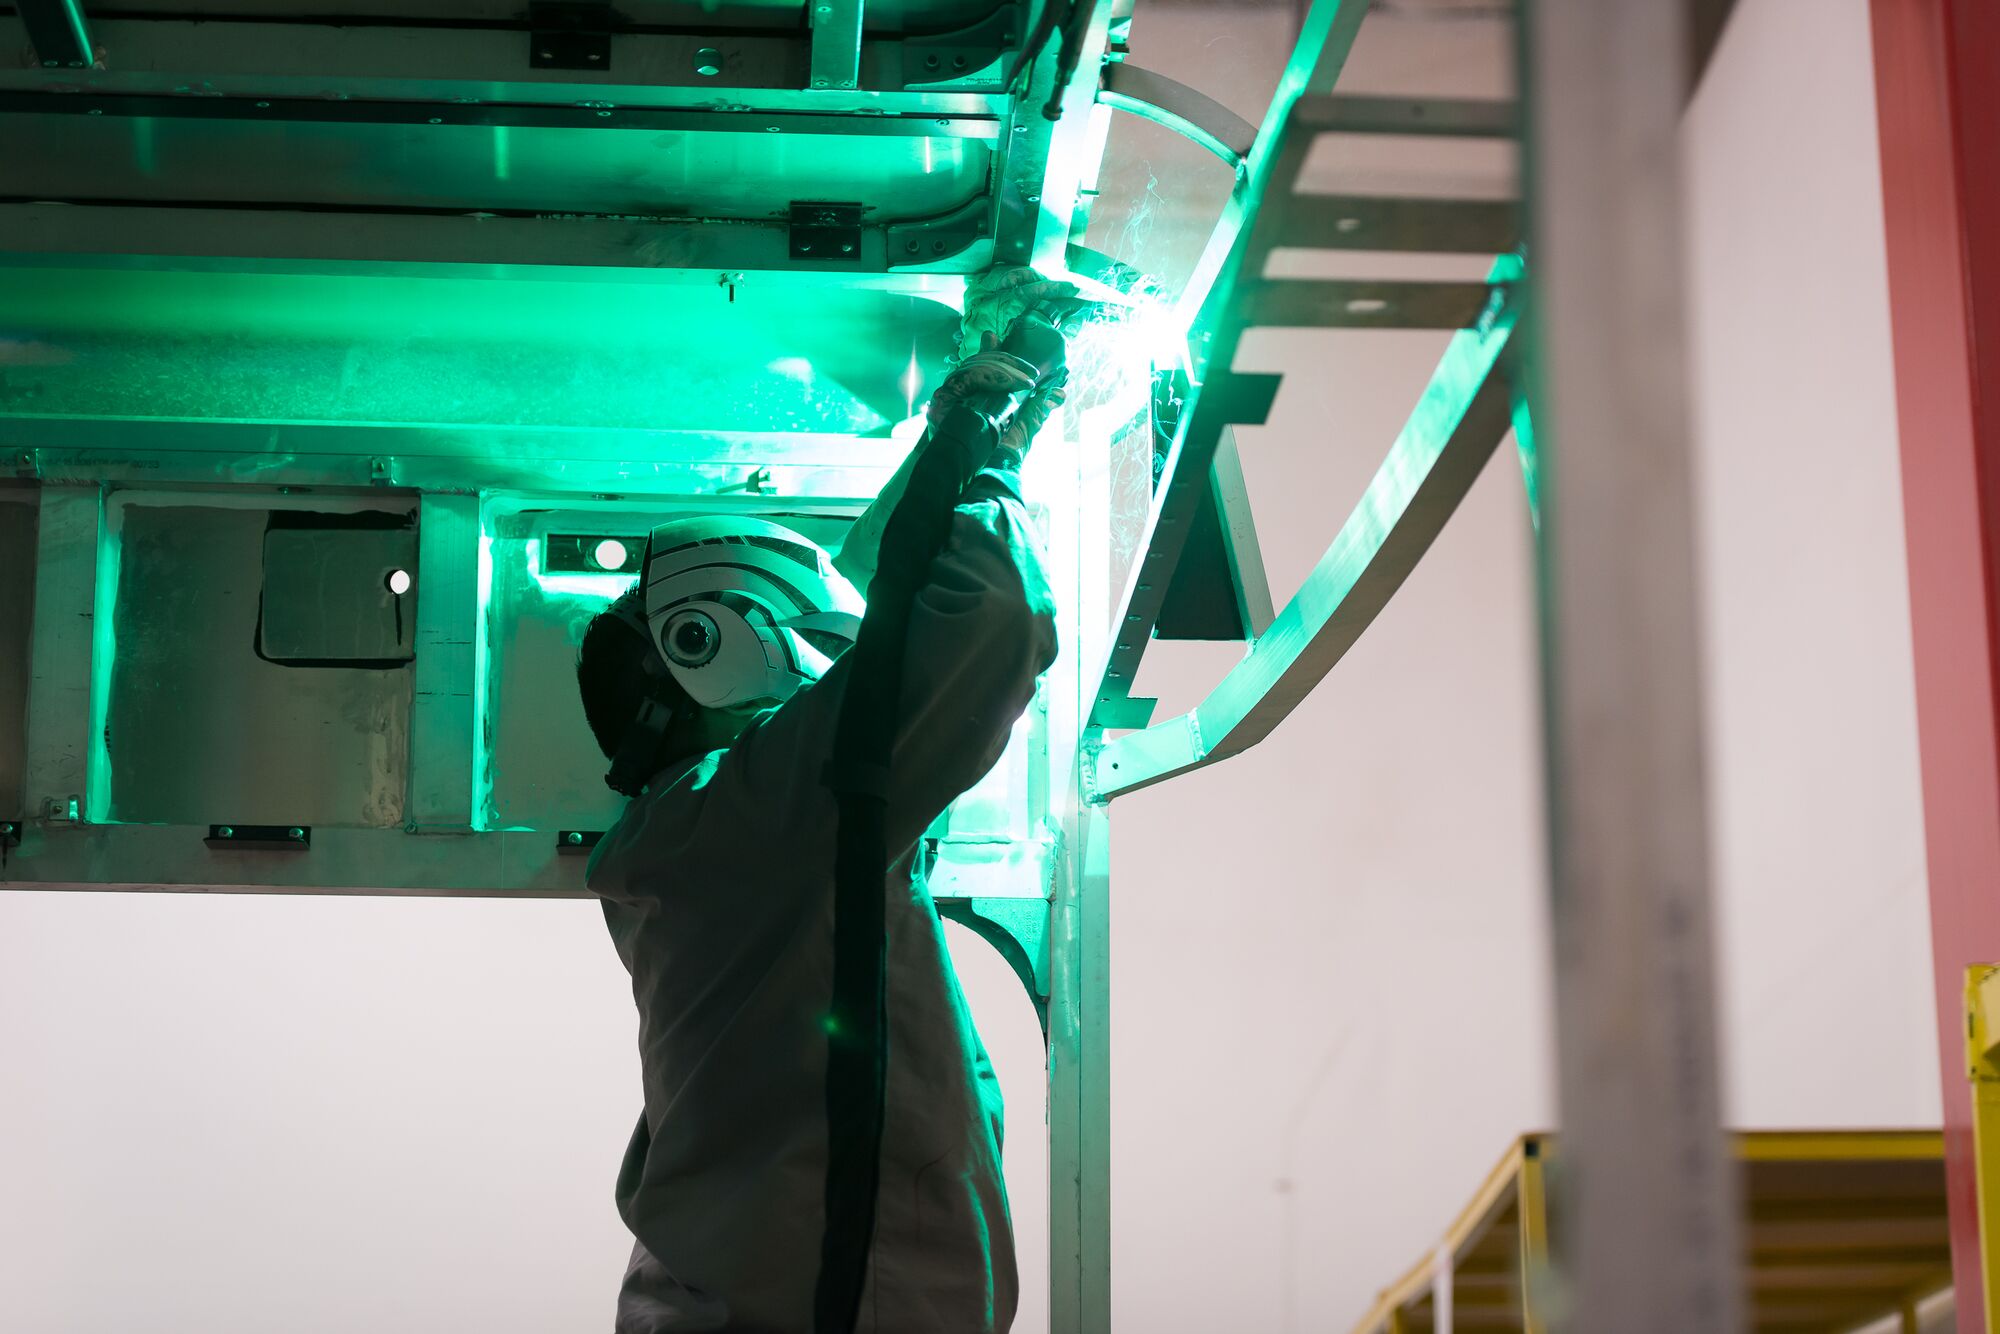 A technician wearing a protective welding mask works on building the frame of an electric bus.